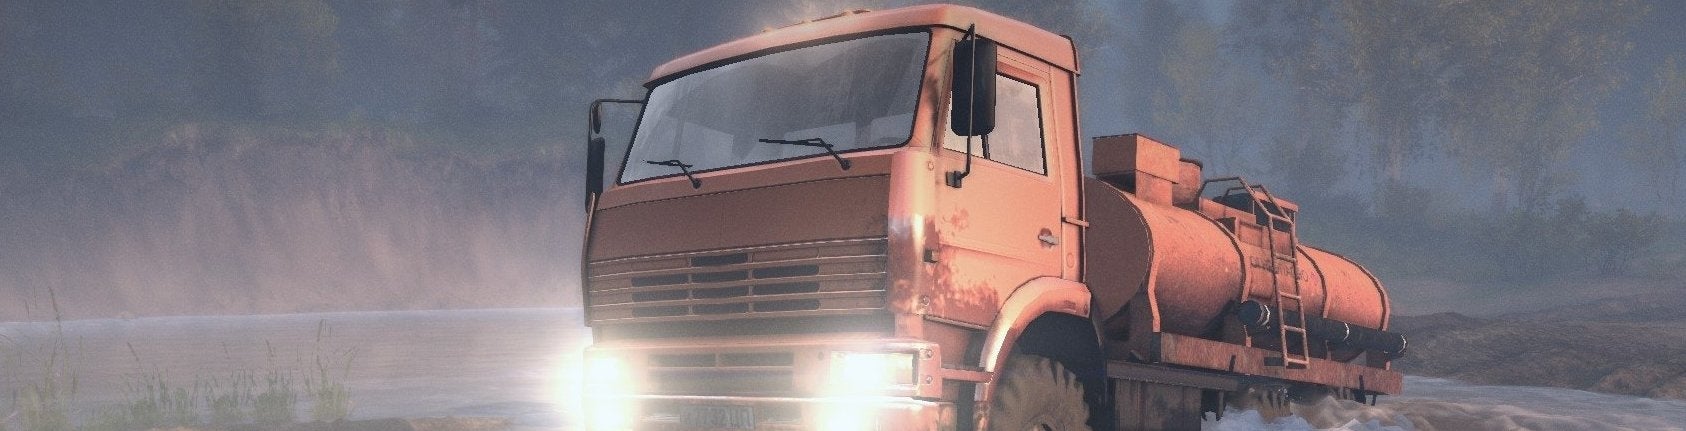 Image for Spintires features trucks with soul